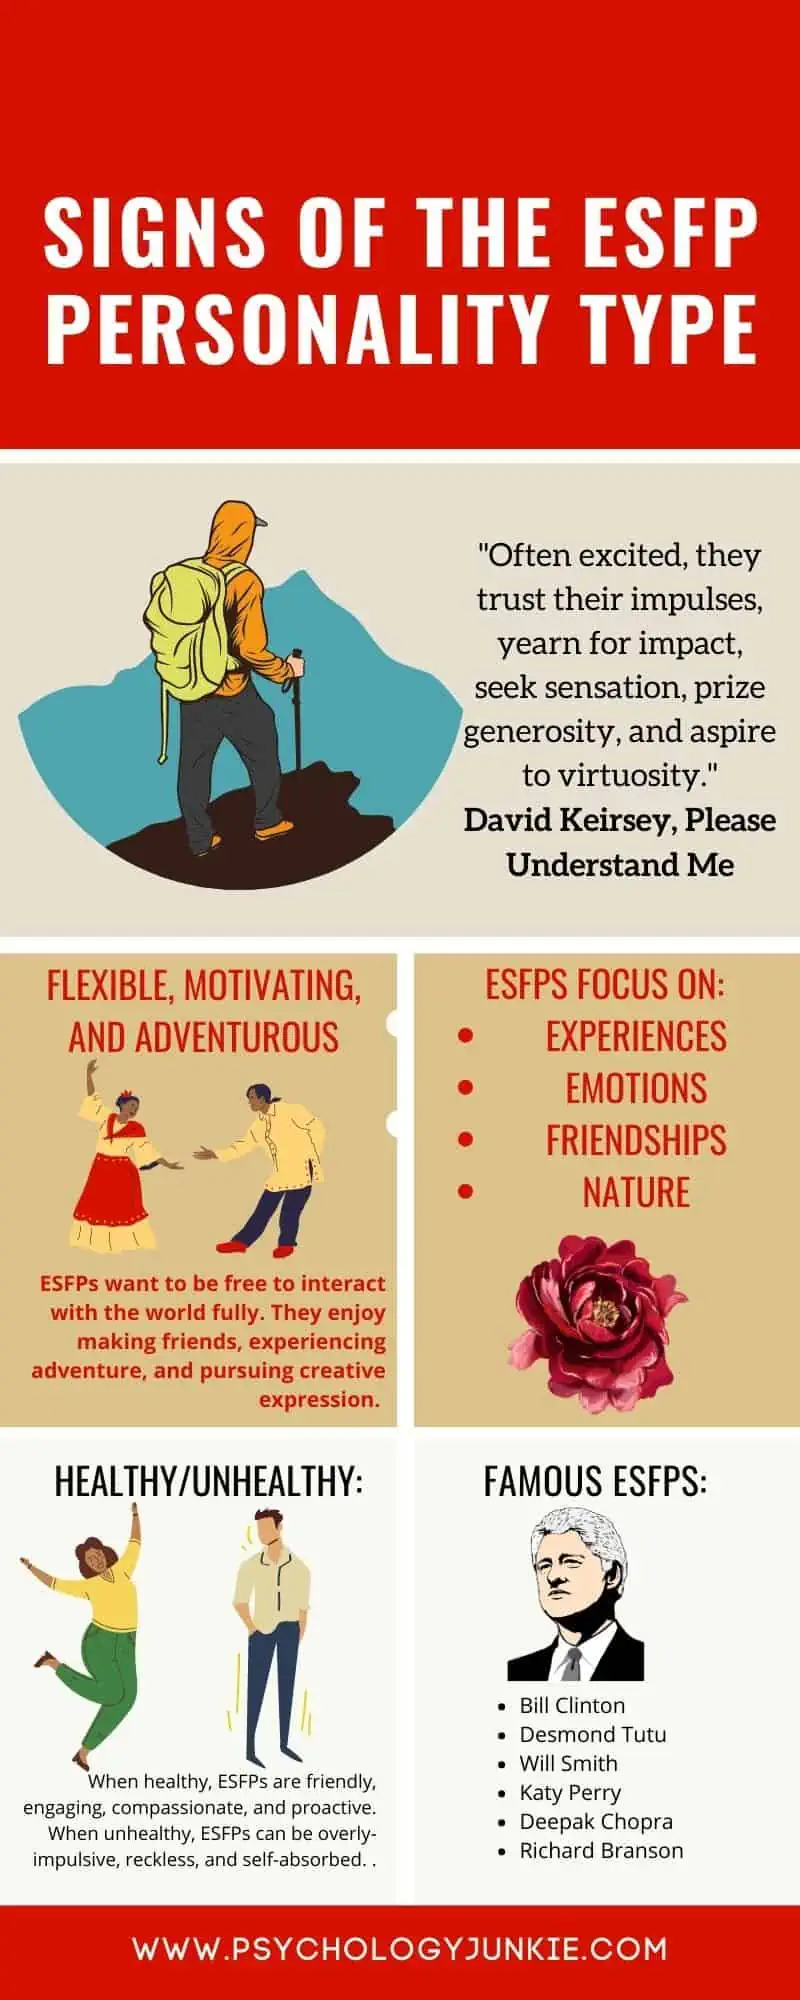 Discover the common traits of the ESFP personality type. #ESFP #MBTI #Personality